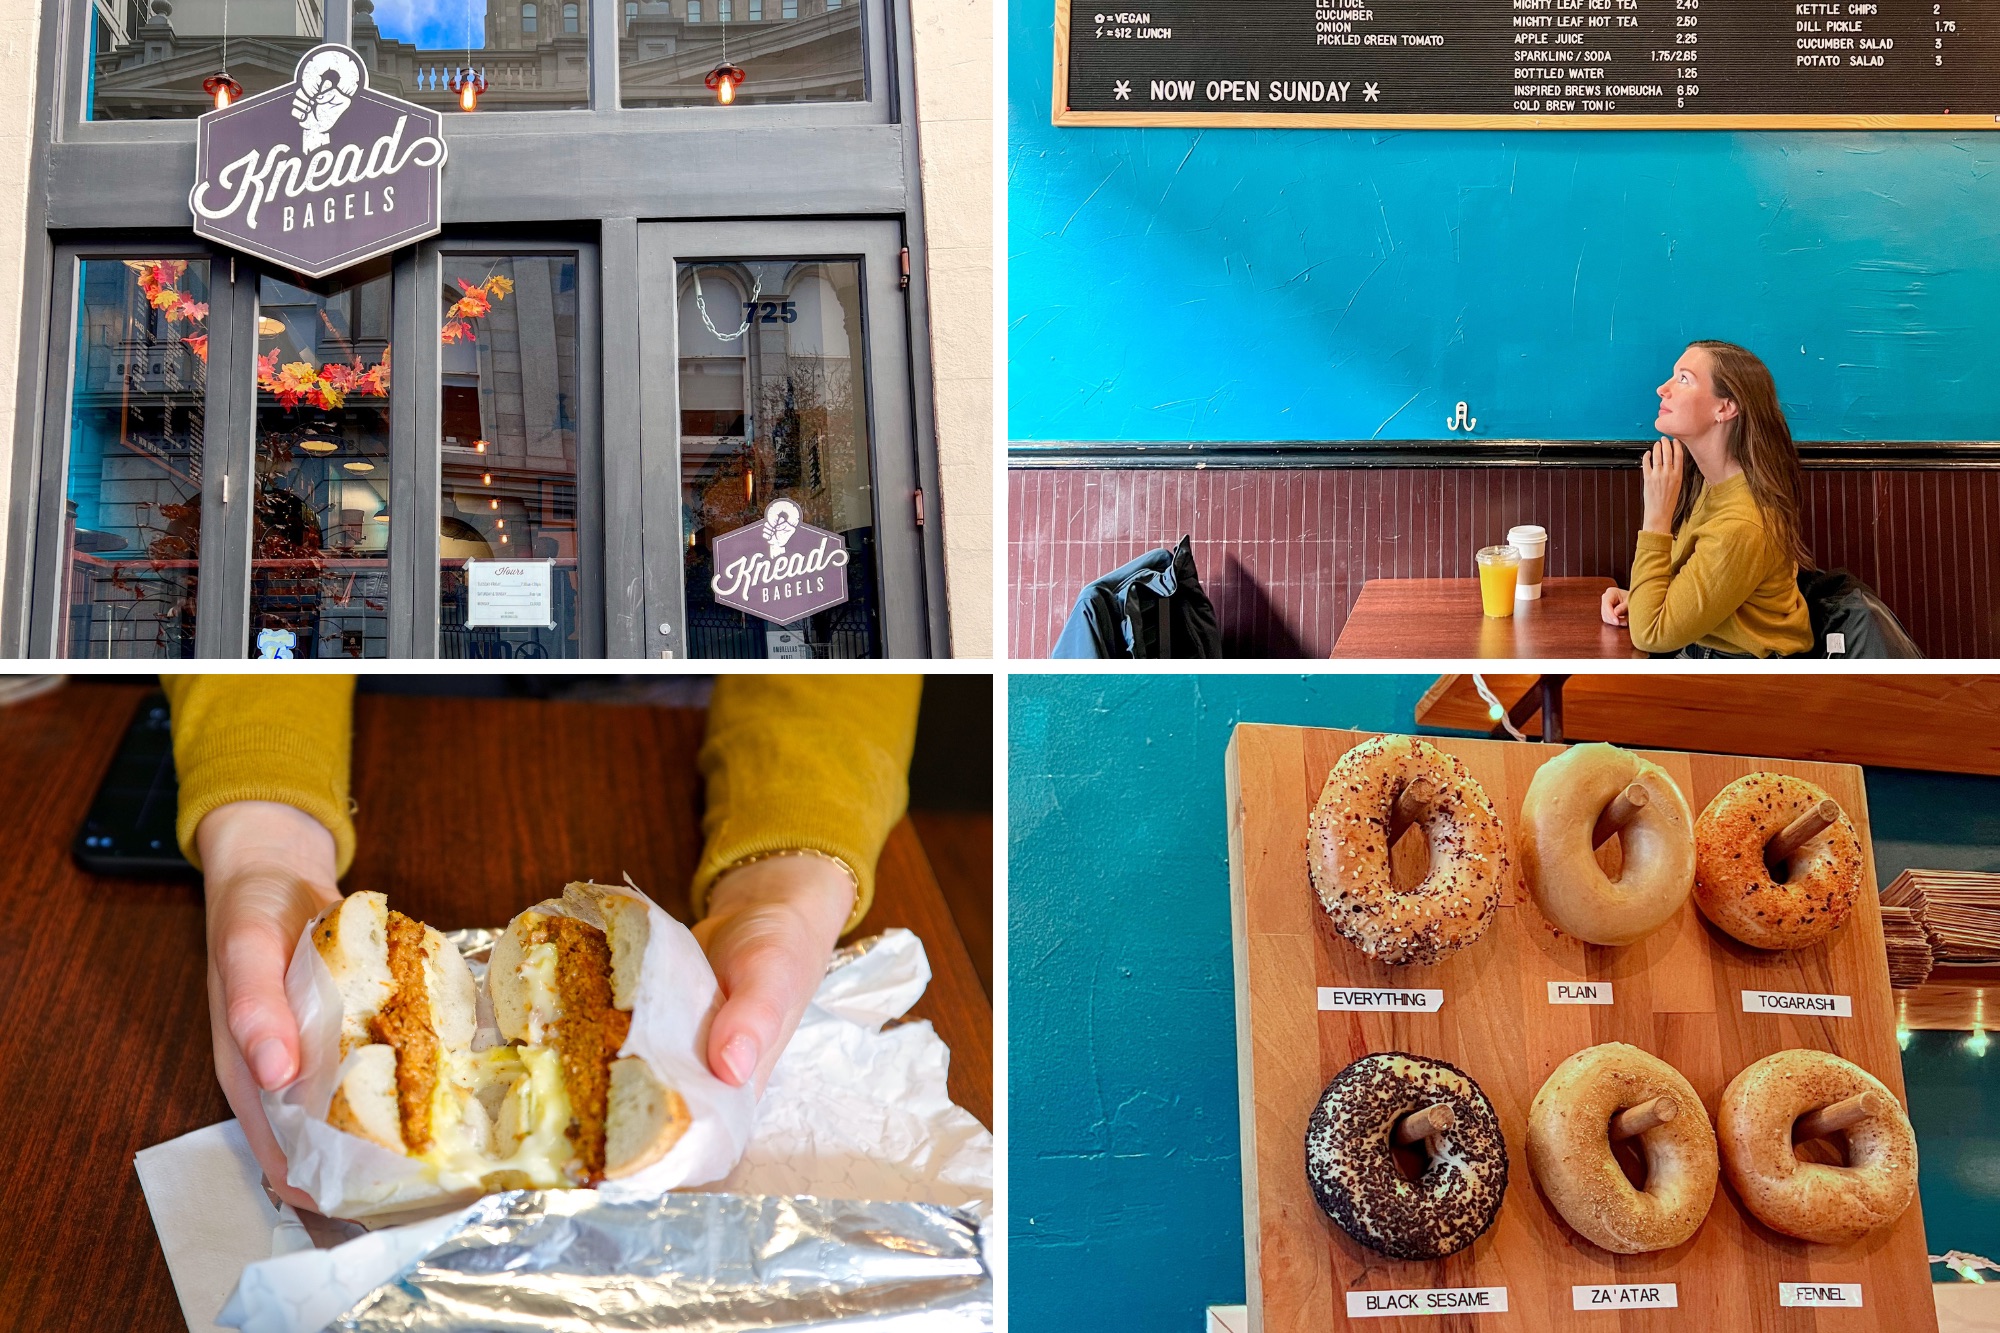 Four images from Knead Bagels, including a bagel sandwich